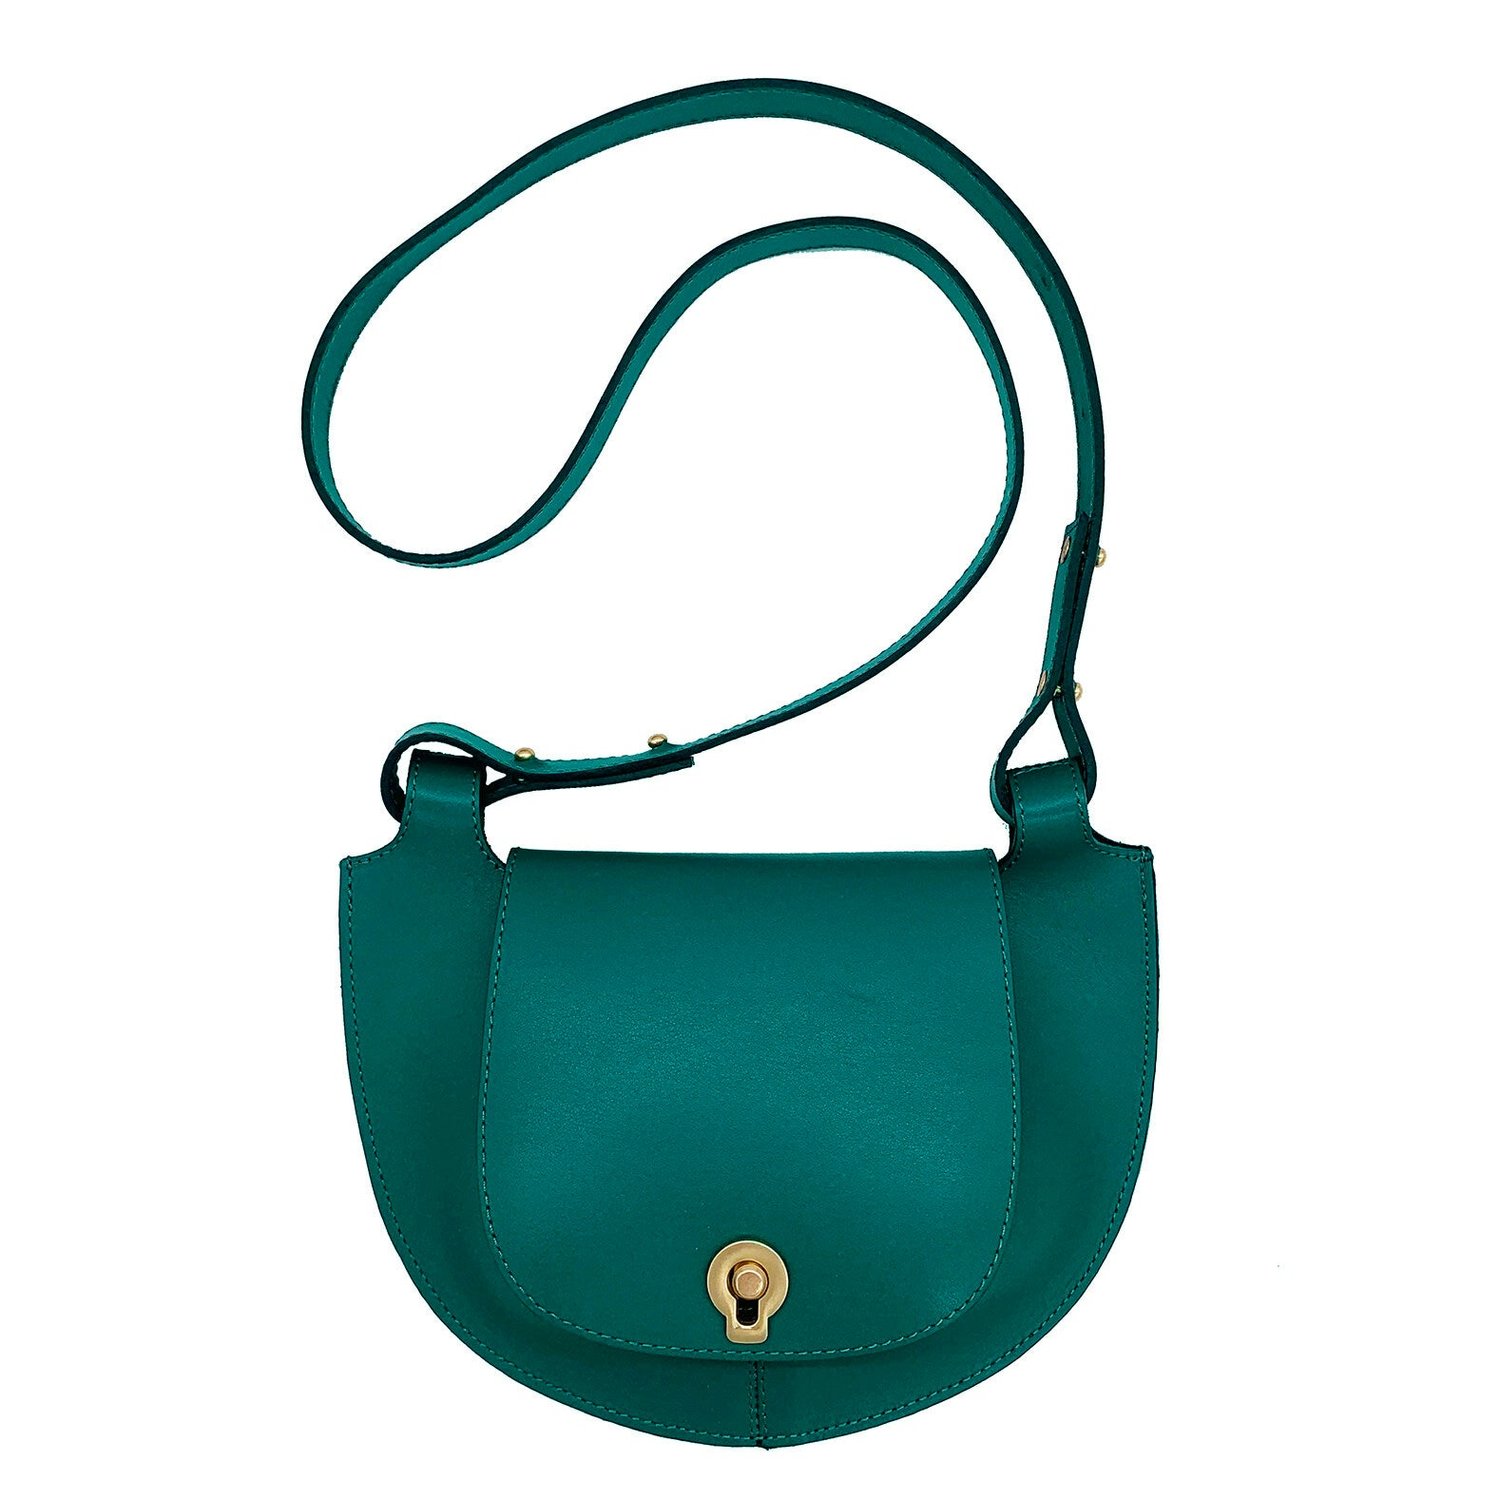 Small leather bag in TURQUOISE. Cross body / shoulder bag in